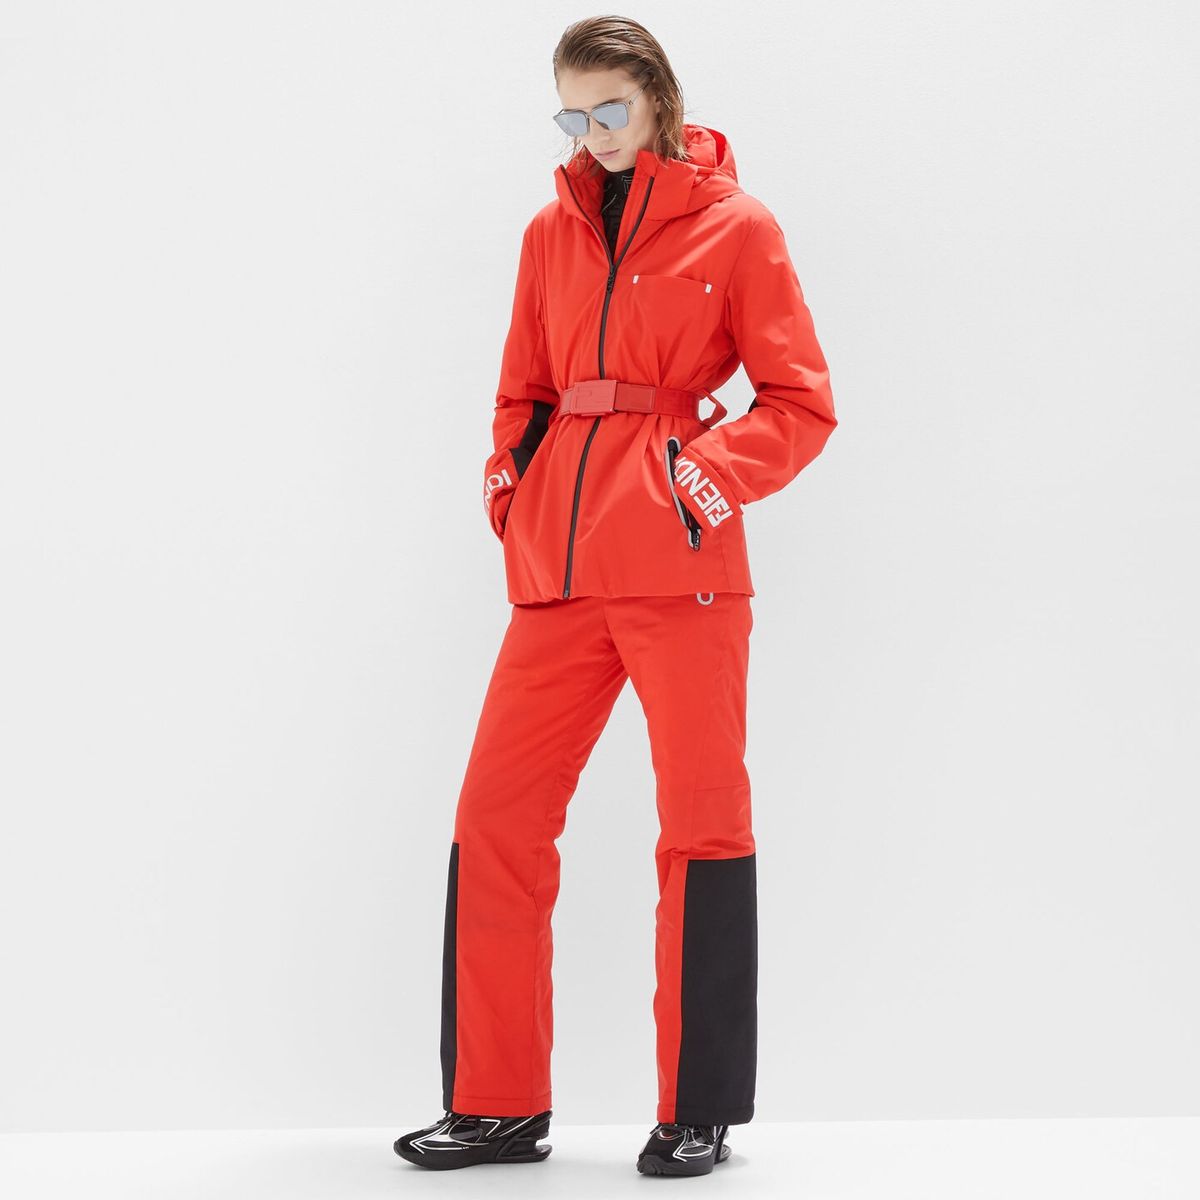 22 Best Ski Outfits of 2023